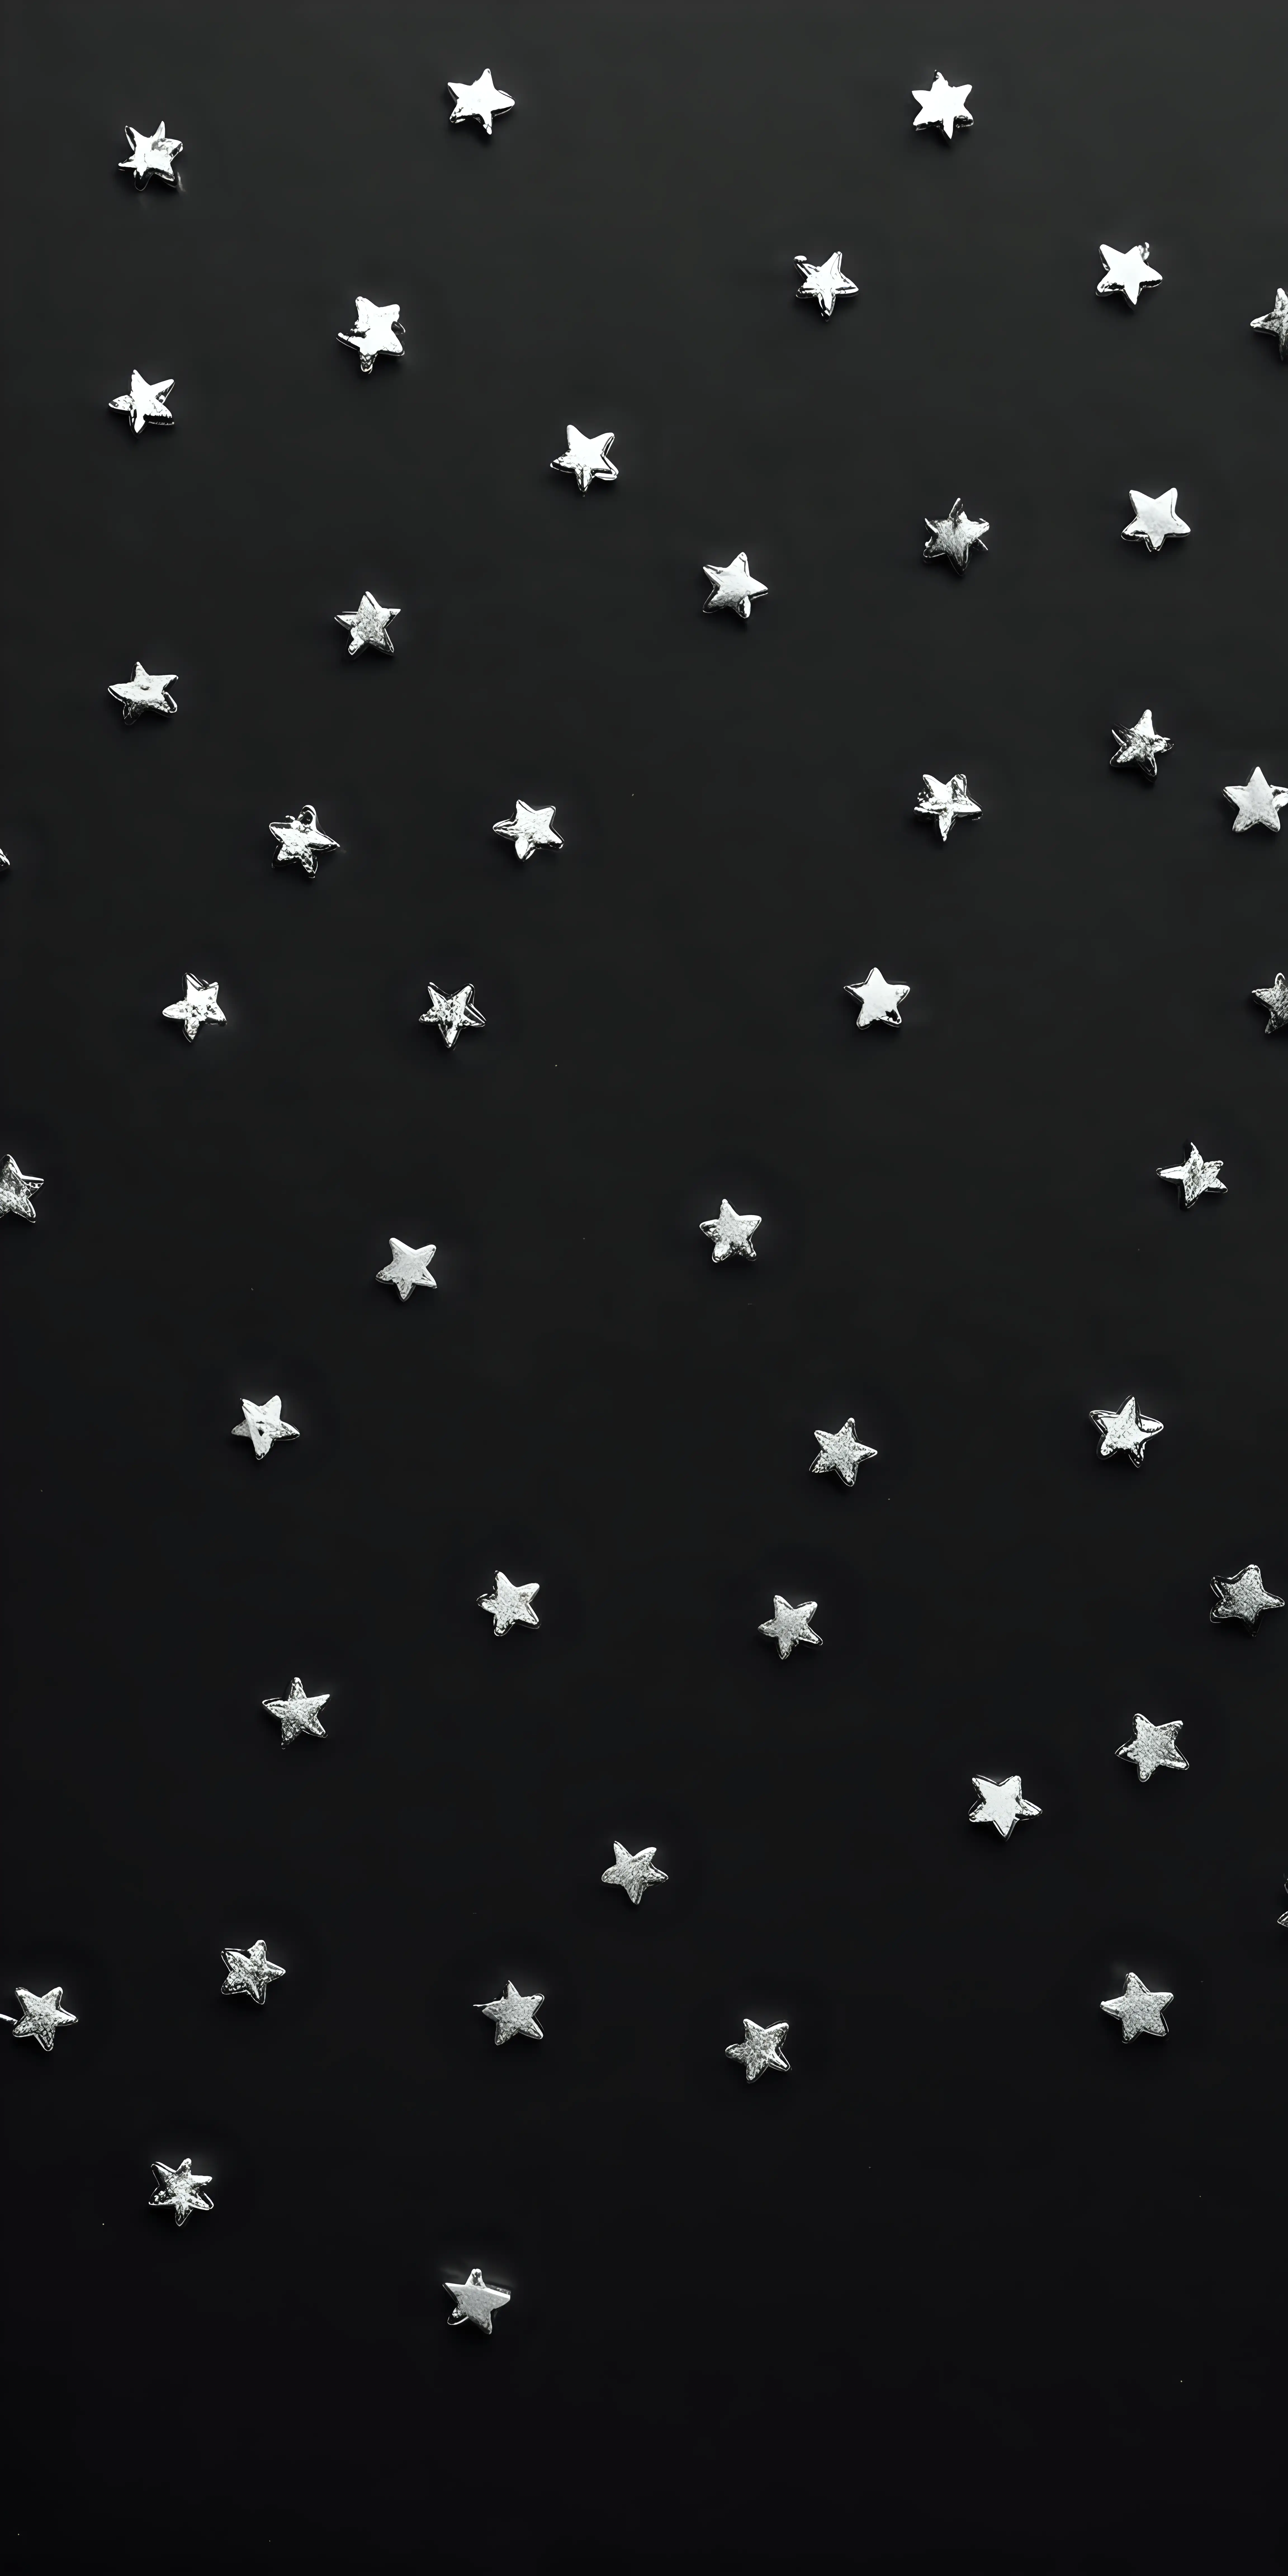 Minimalistic Black Background with Scattered Silver Stars